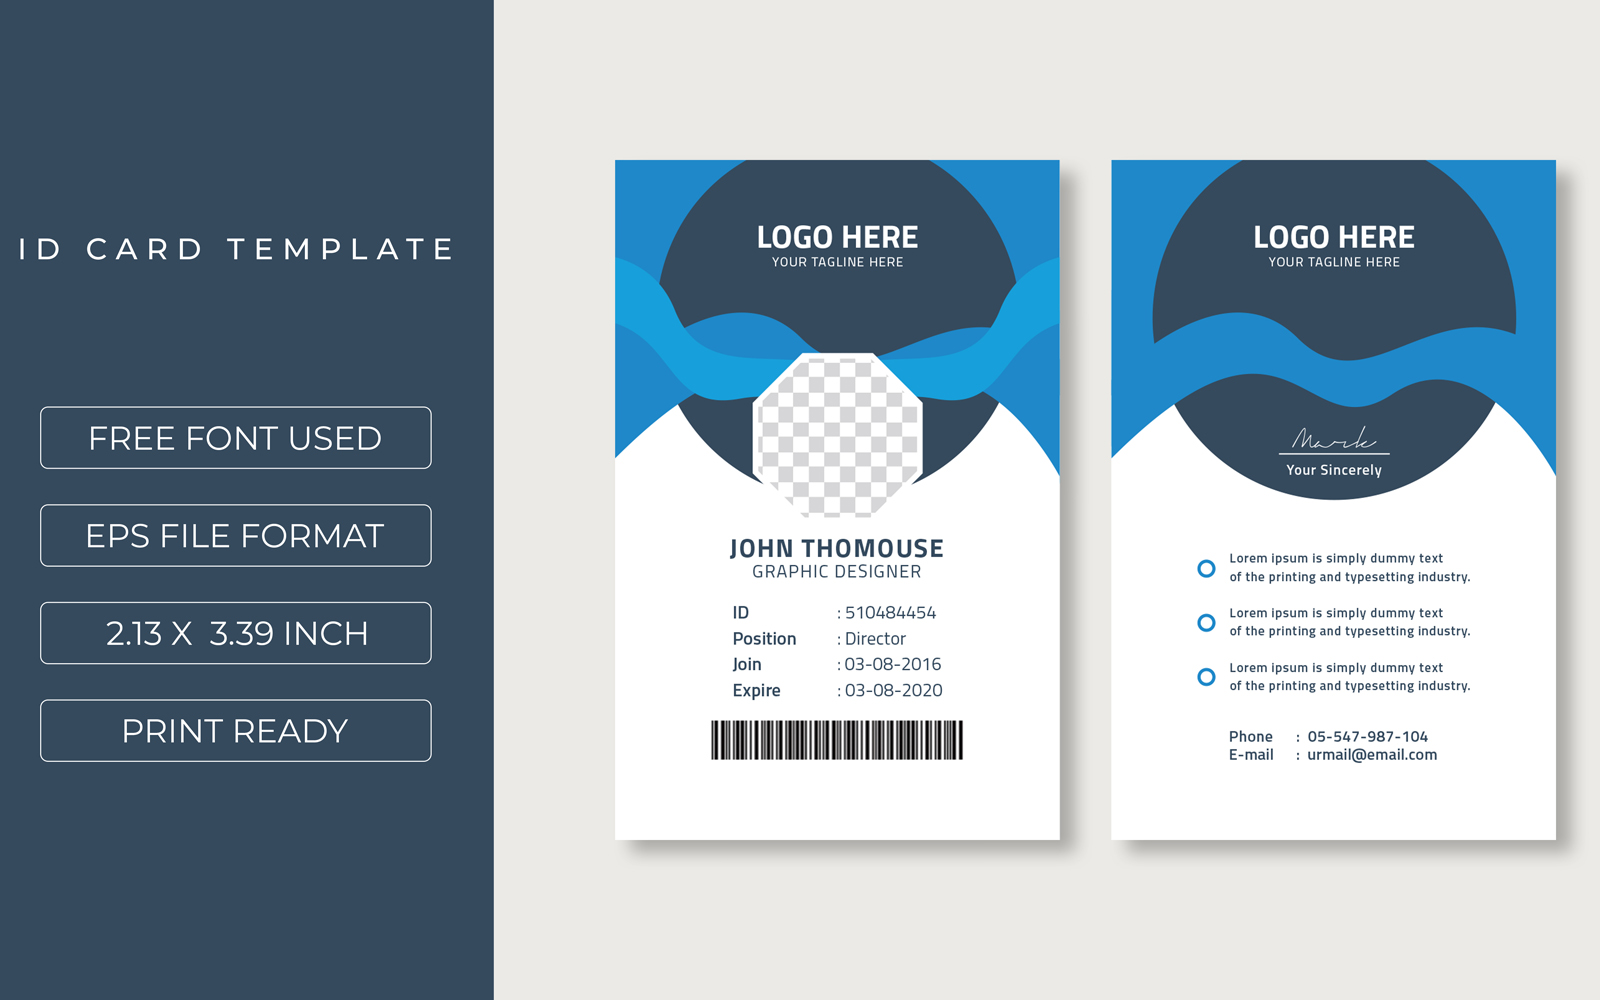 Id Card Layout with Blue Accents